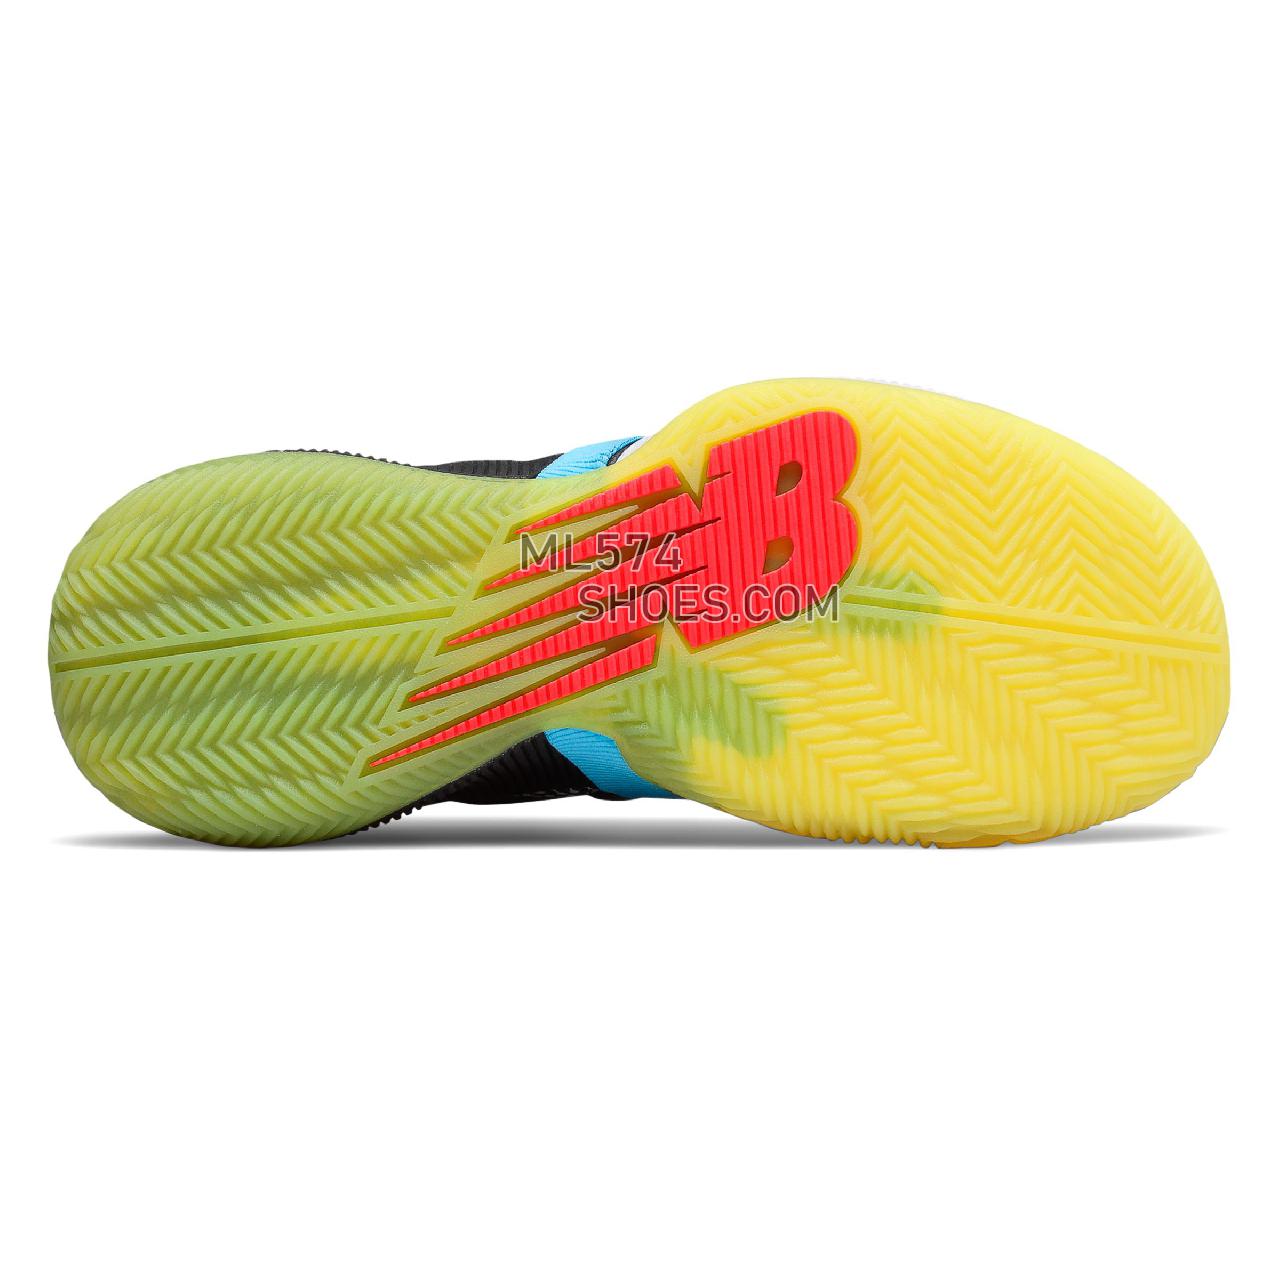 New Balance OMN1S - Women's Classic Sneakers - Black with Sulphur Yellow and Energy Red - WBOMN1SB